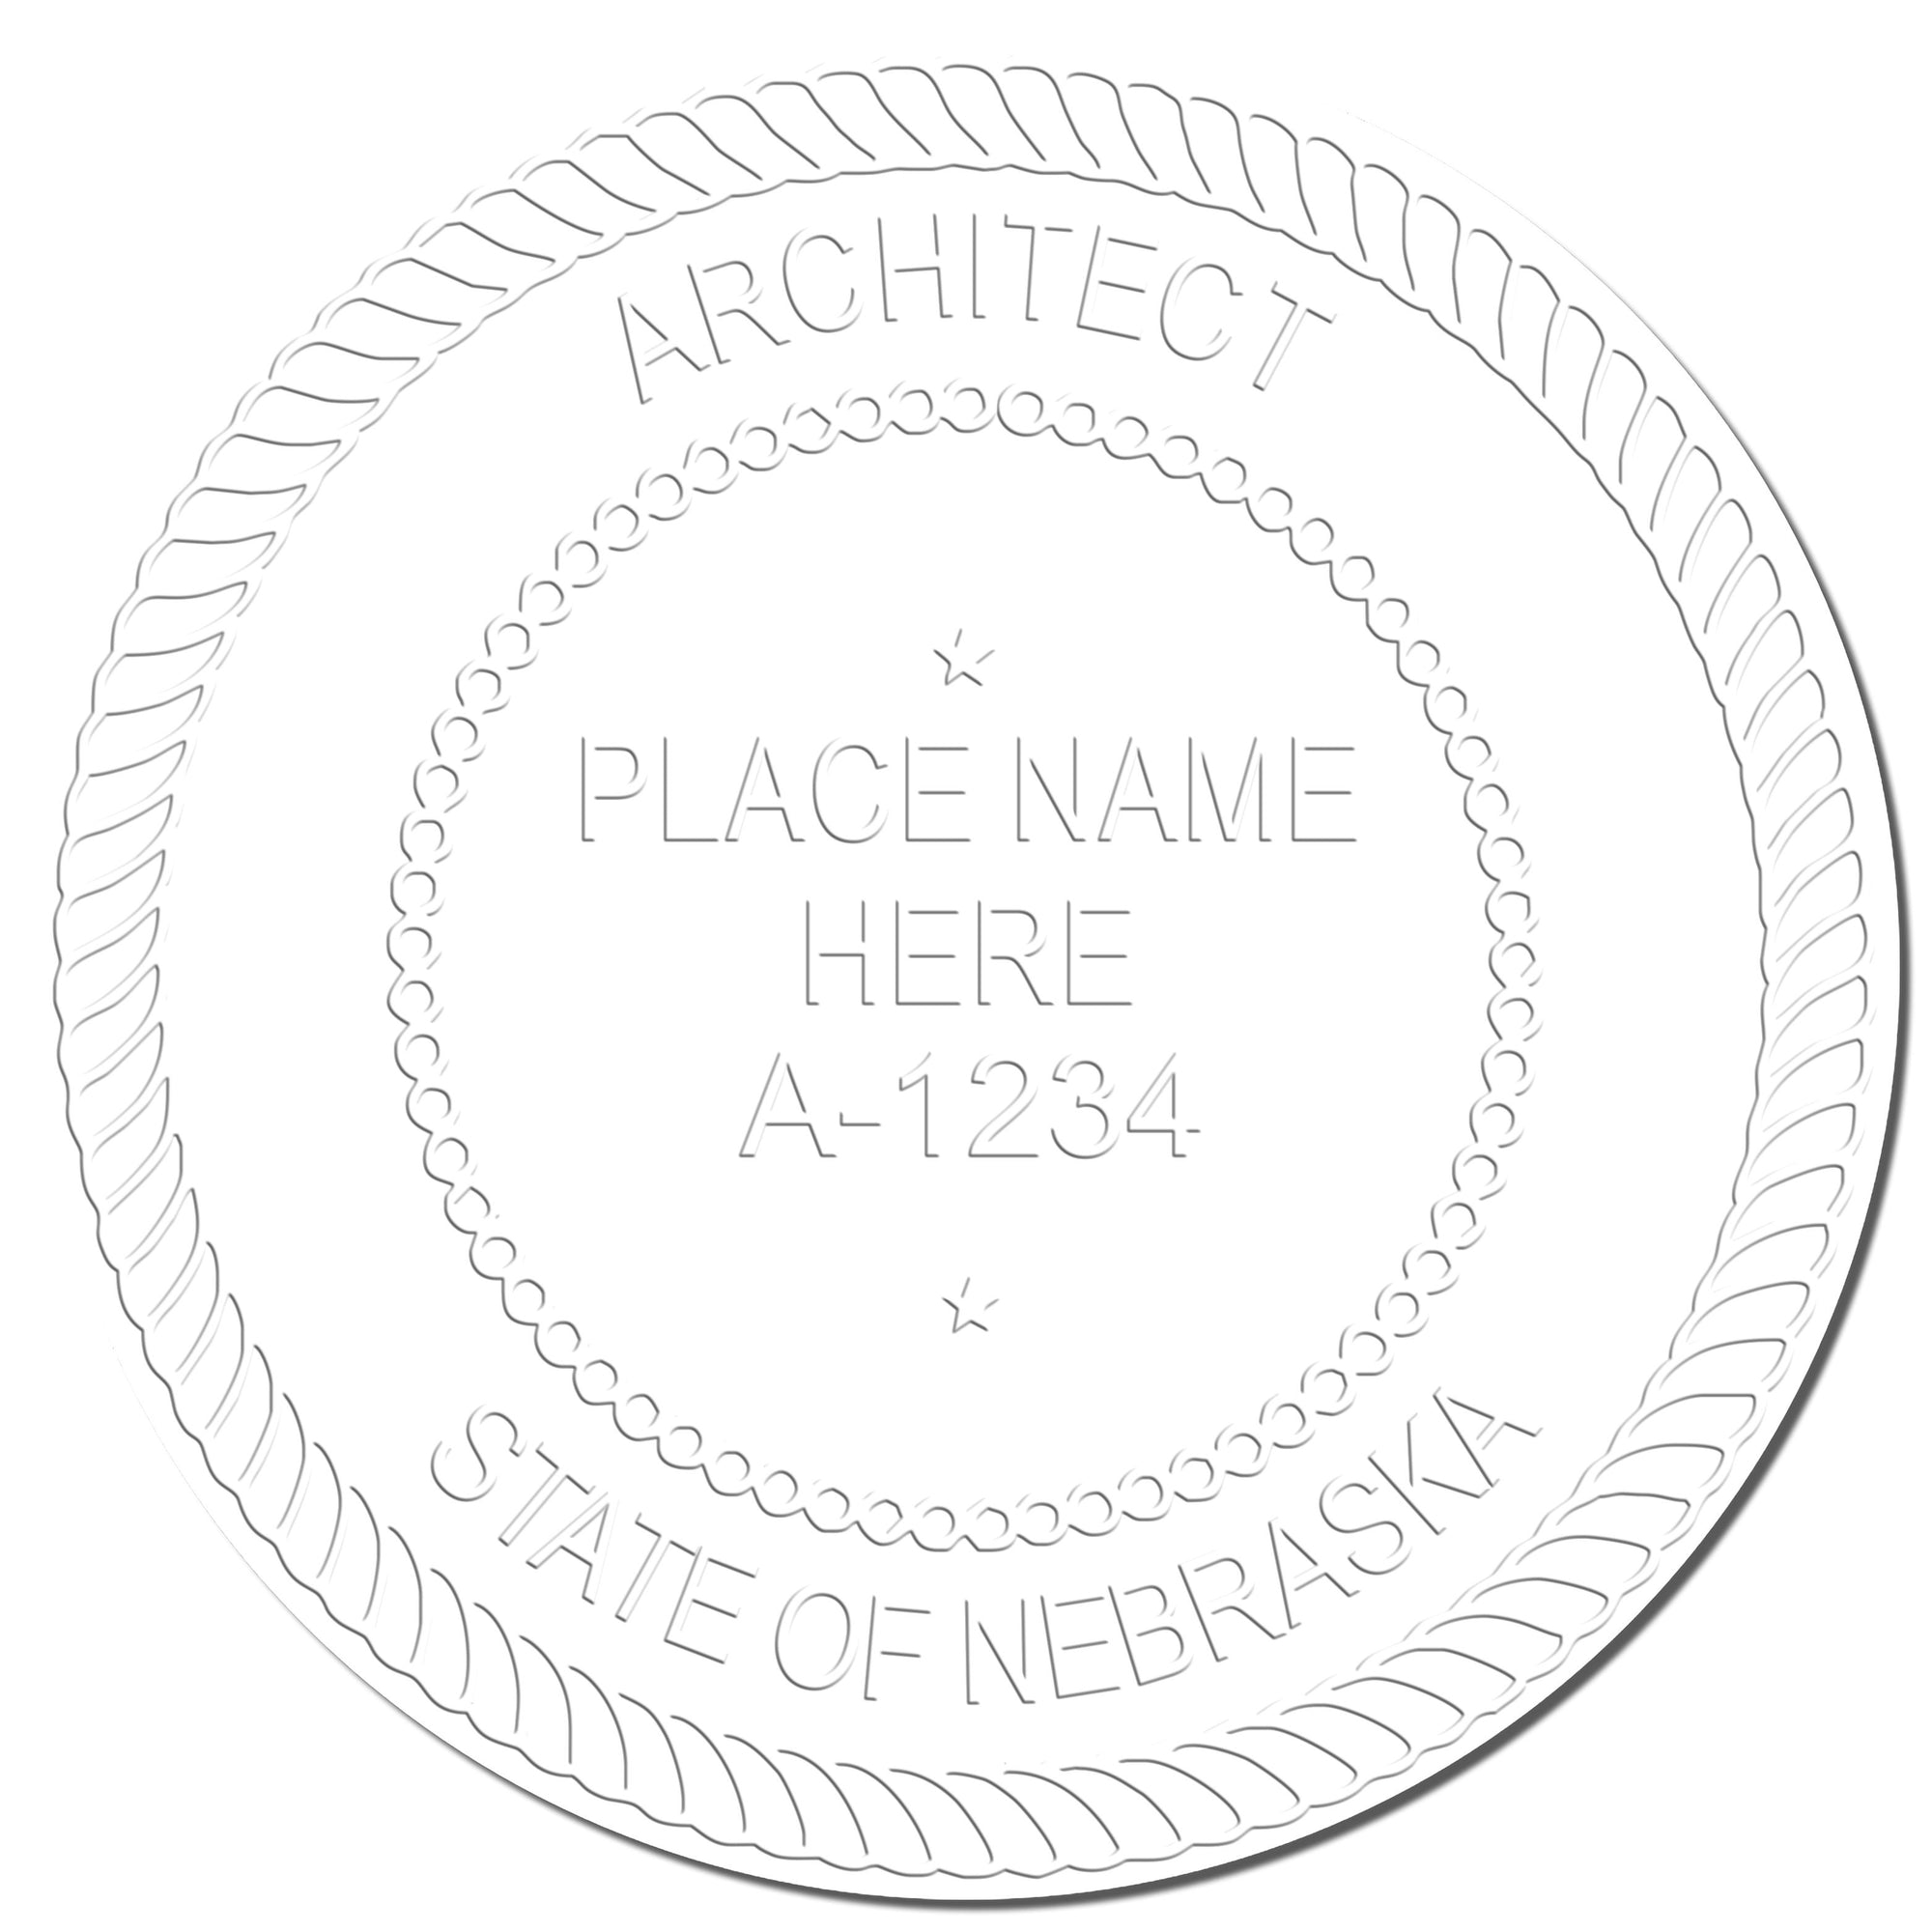 The main image for the State of Nebraska Long Reach Architectural Embossing Seal depicting a sample of the imprint and electronic files